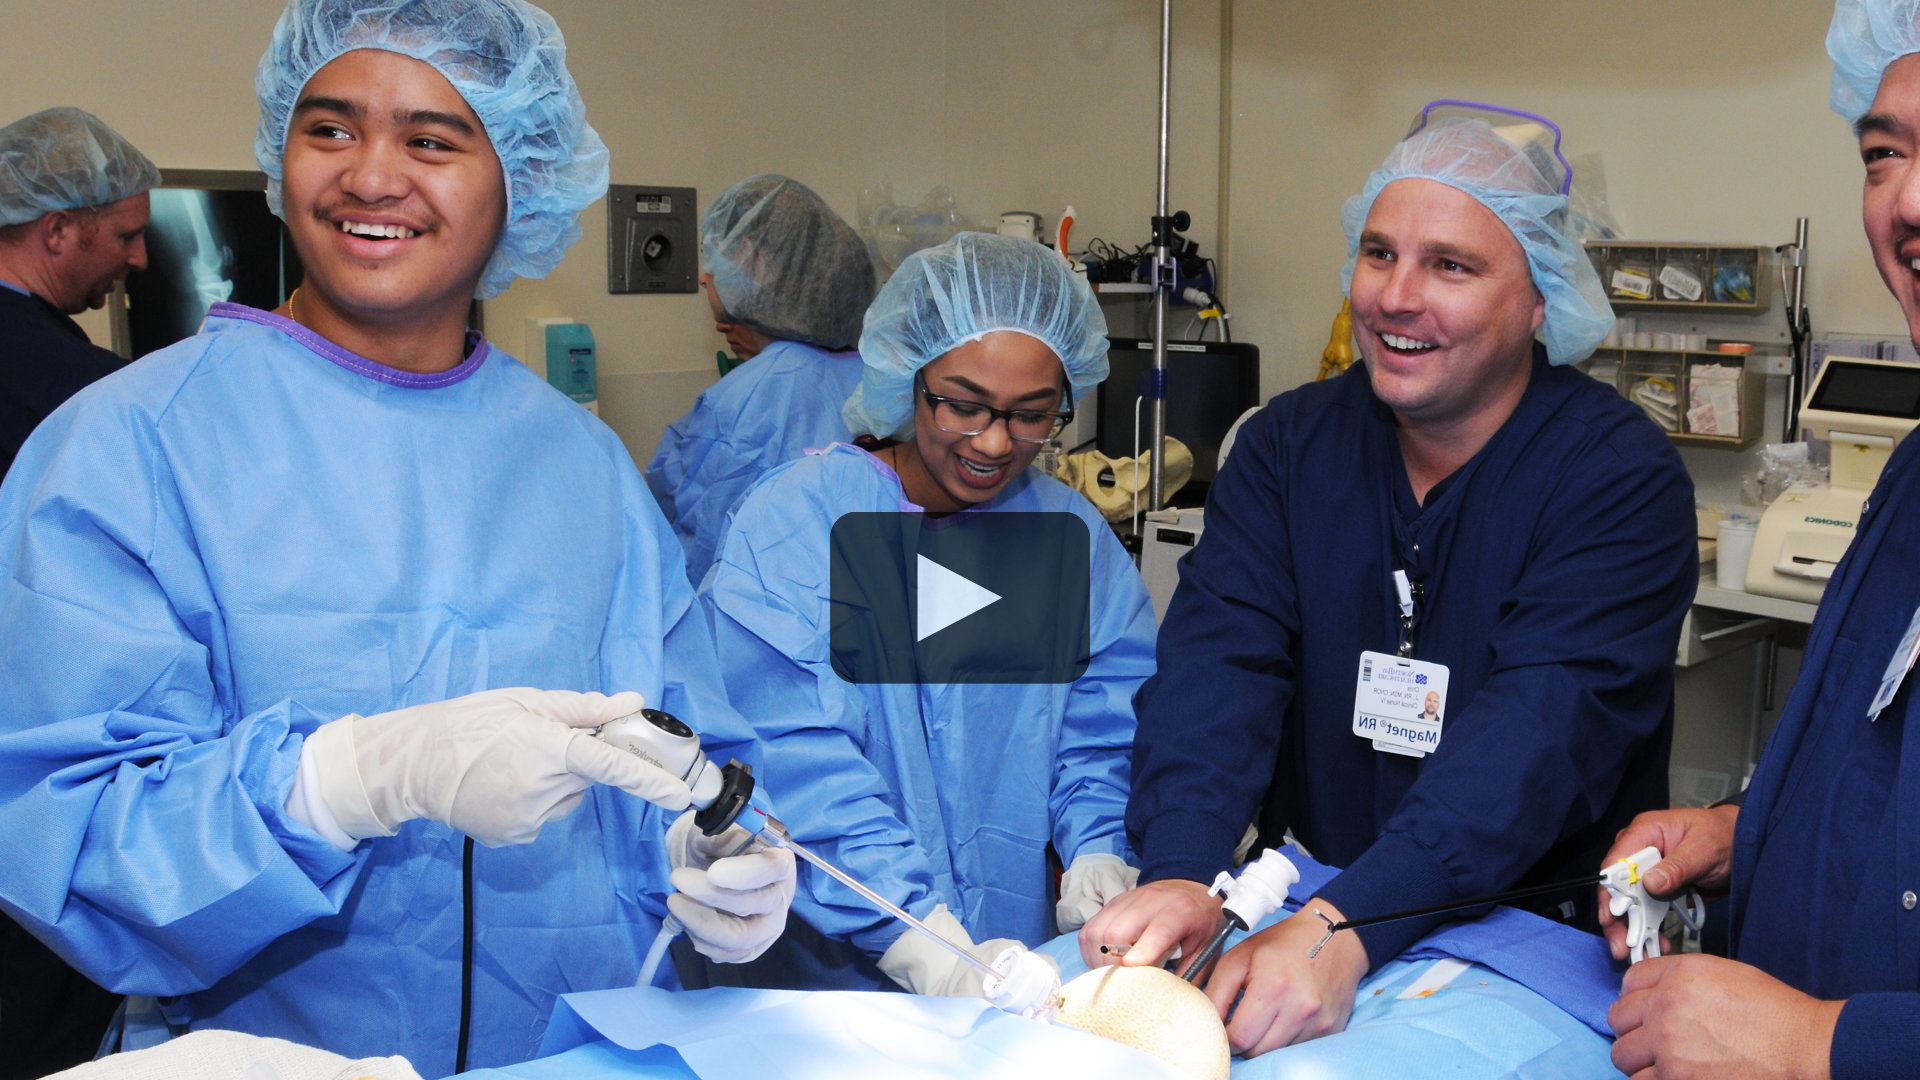 Learn more about NorthBay Healthcare's annual Nurse Camp for high school students.